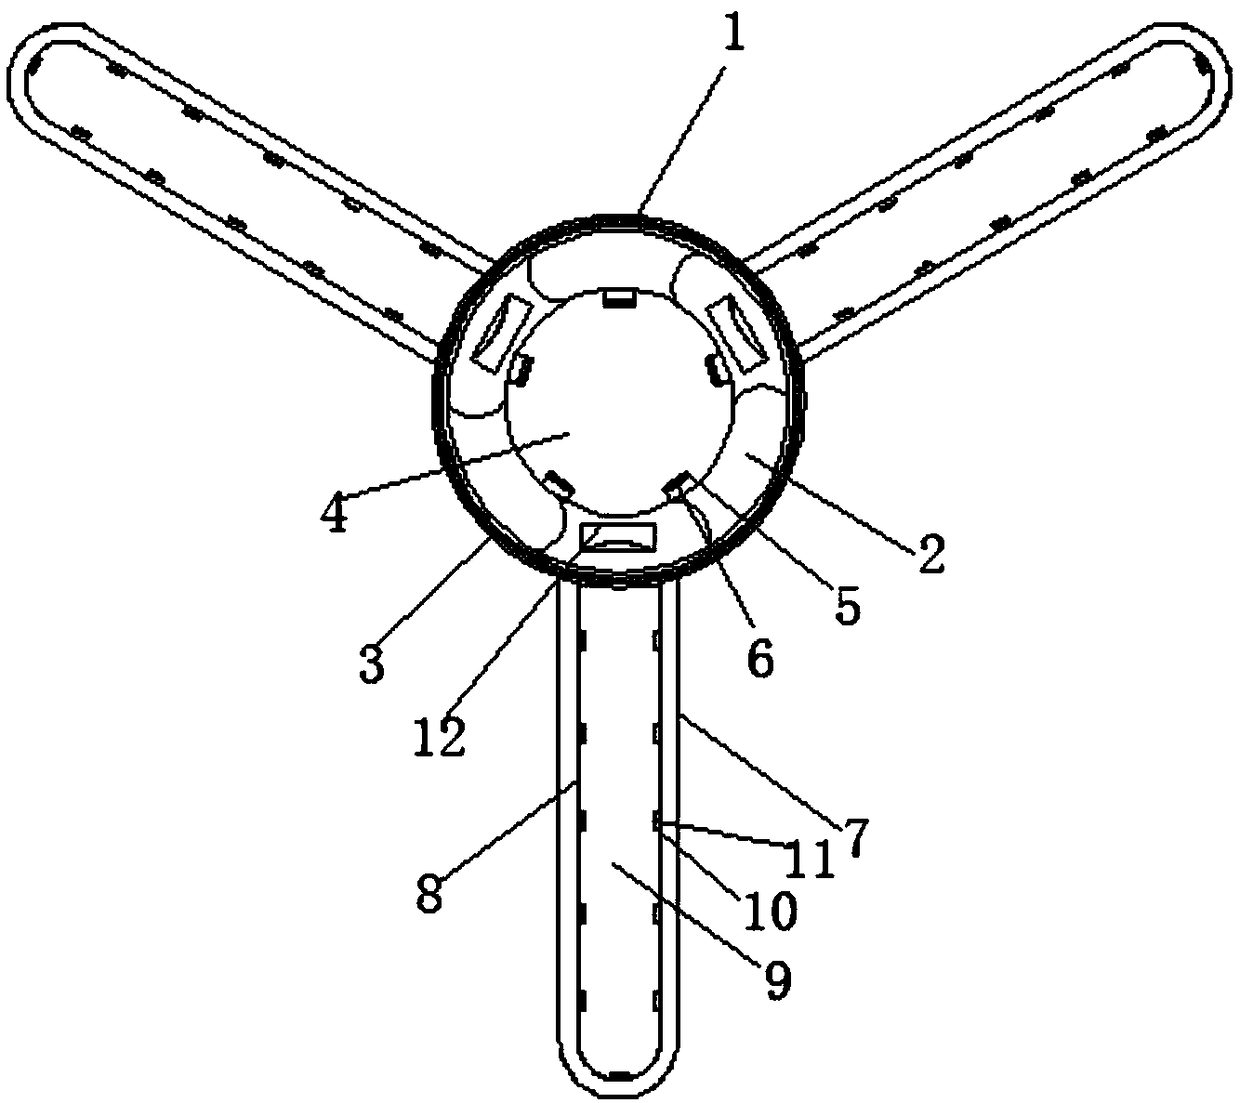 Dust cover apparatus for ceiling fan